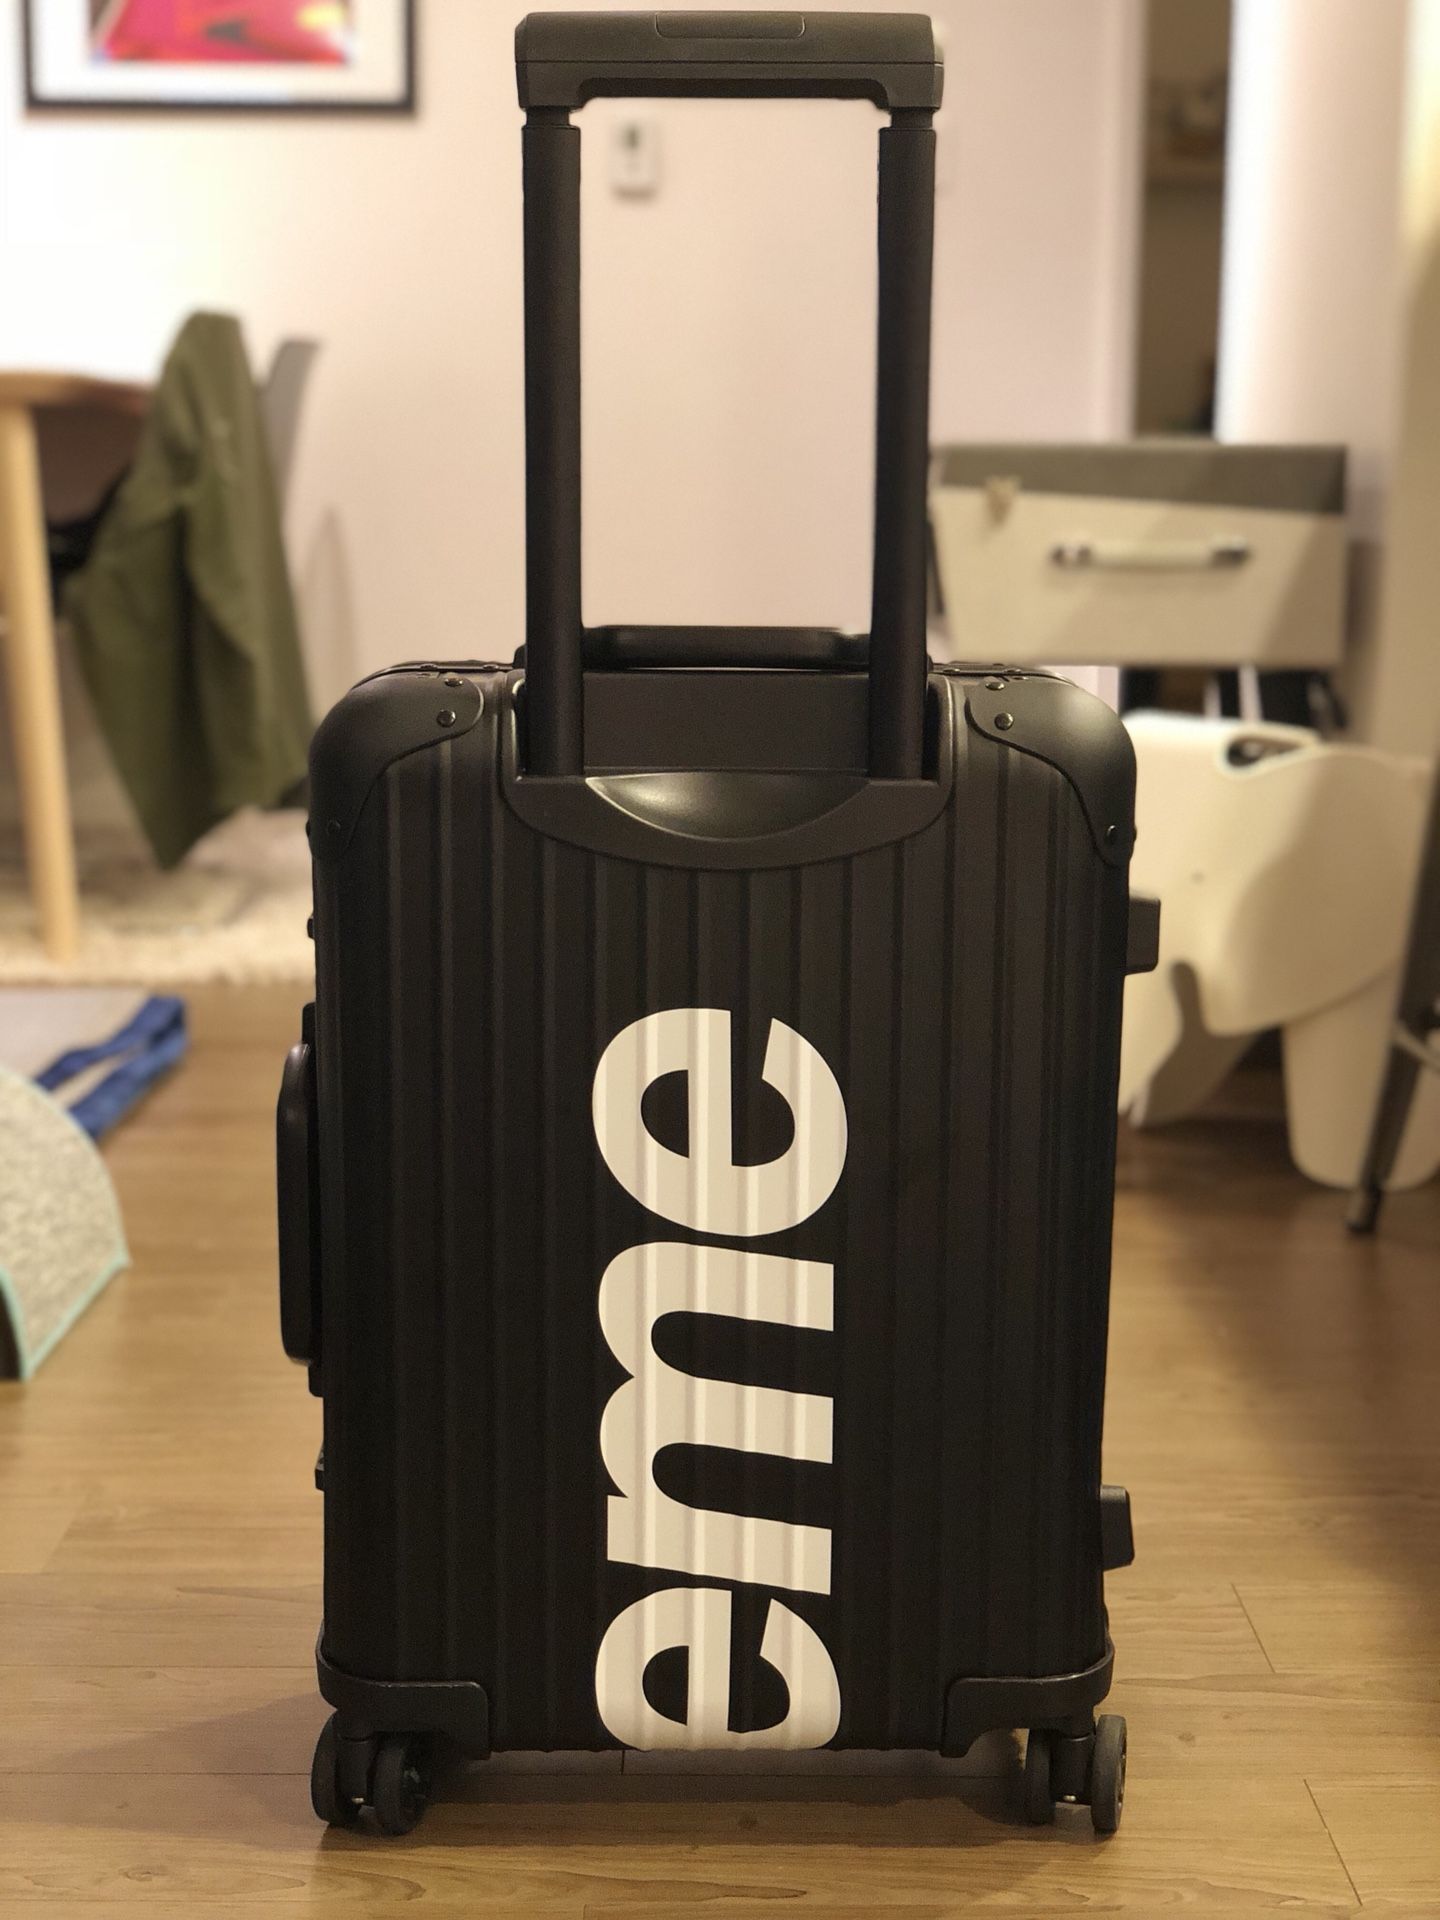 Supreme Rimowa 45L Carry On Suitcase Red